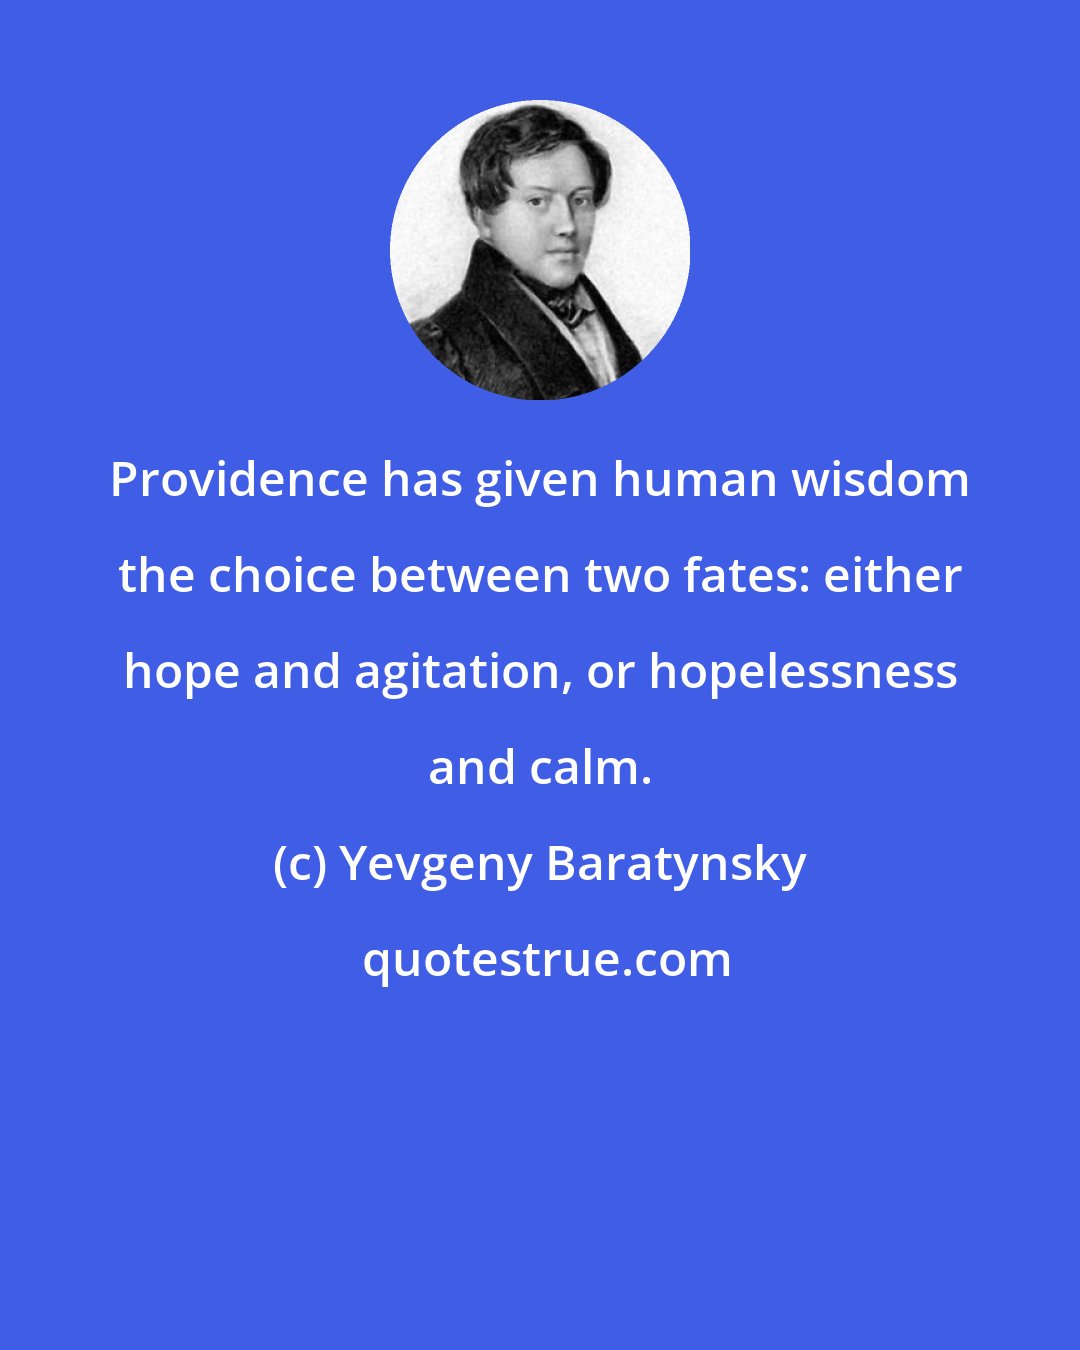 Yevgeny Baratynsky: Providence has given human wisdom the choice between two fates: either hope and agitation, or hopelessness and calm.